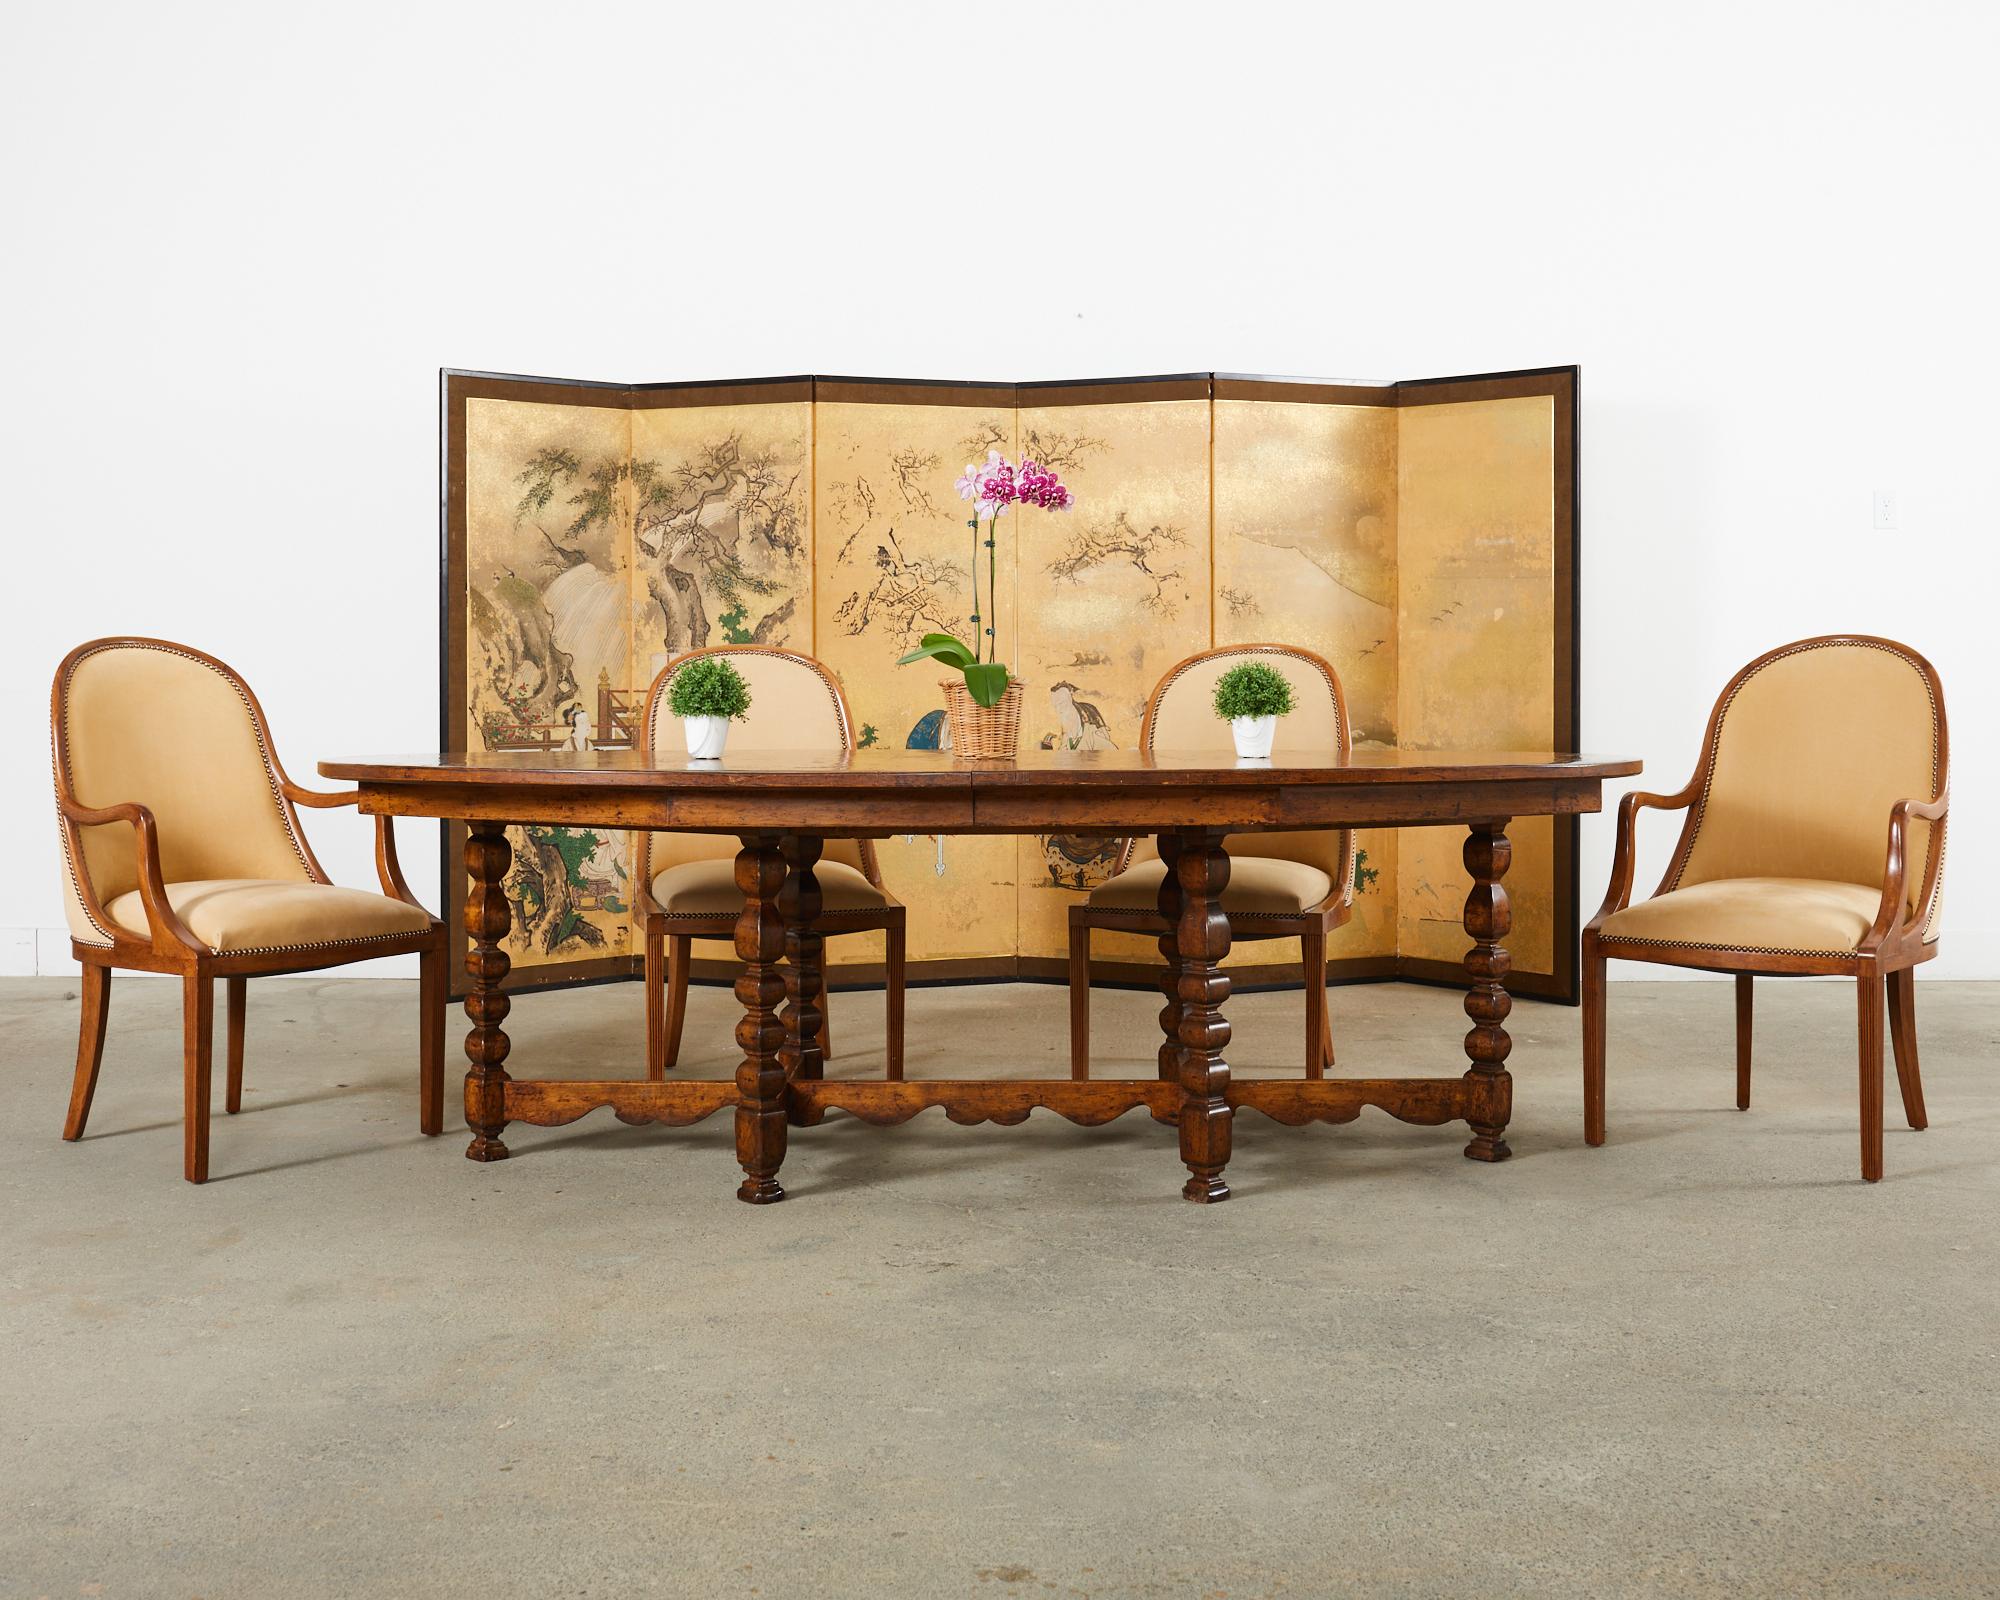 Amazing set of four leather Plante gondola dining chairs by Dessin Fournir. The set consists of two side chairs and two host armchairs with 26.5 inch high arms. The bespoke Plante chairs (model 1020-S) are hand-crafted from walnut and custom ordered